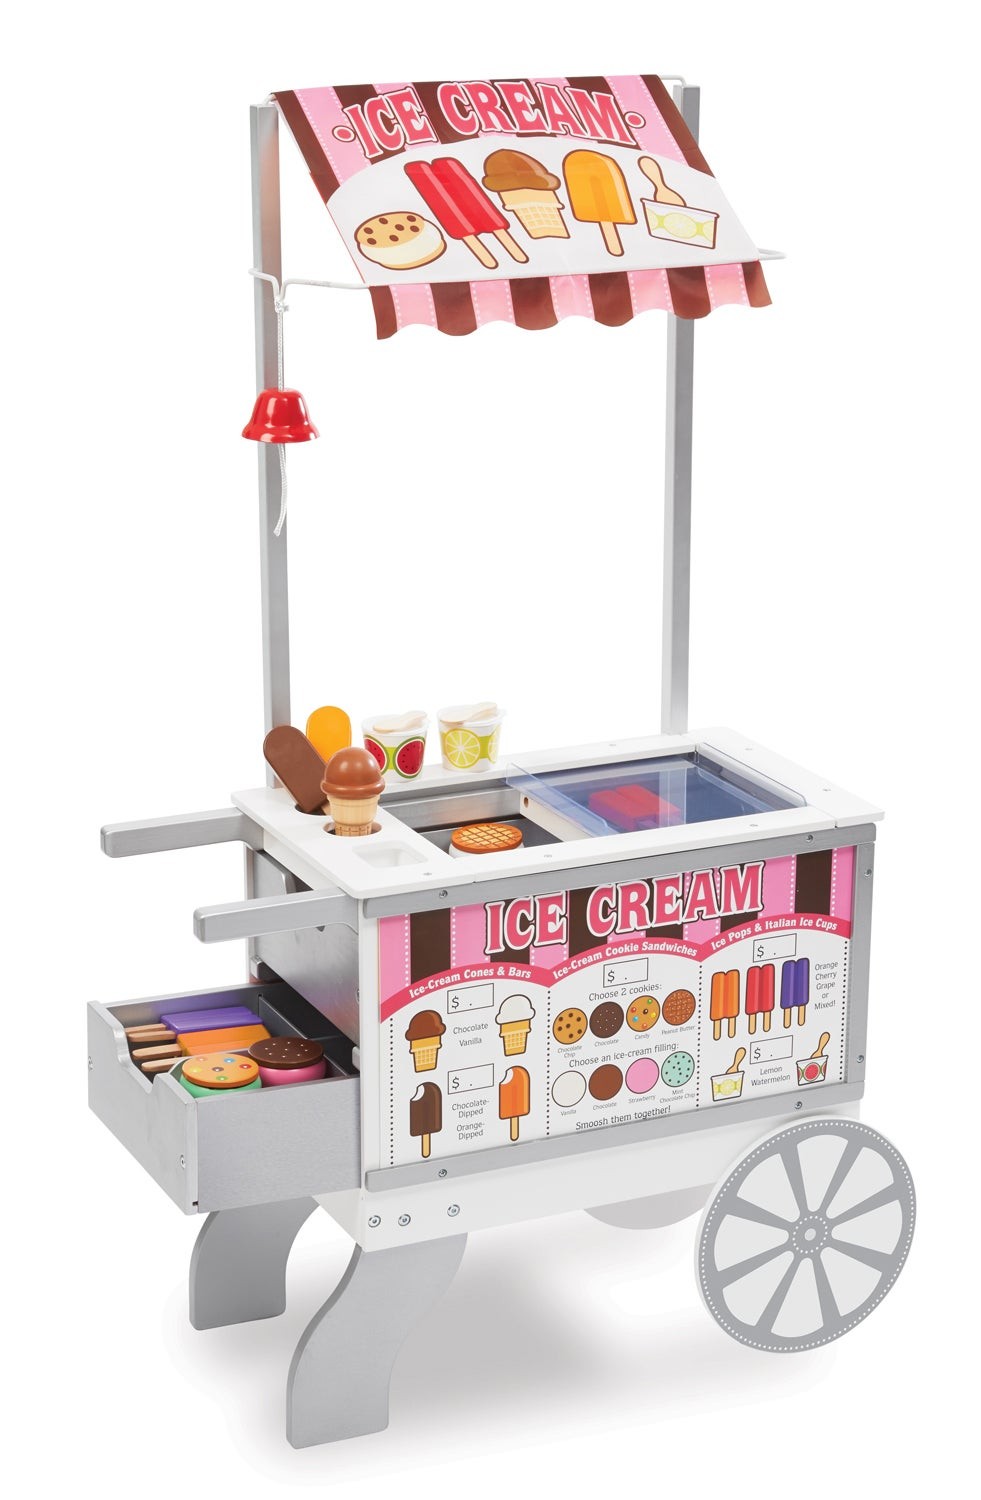 Snacks & Sweets Food Cart Ages 3-7 Years